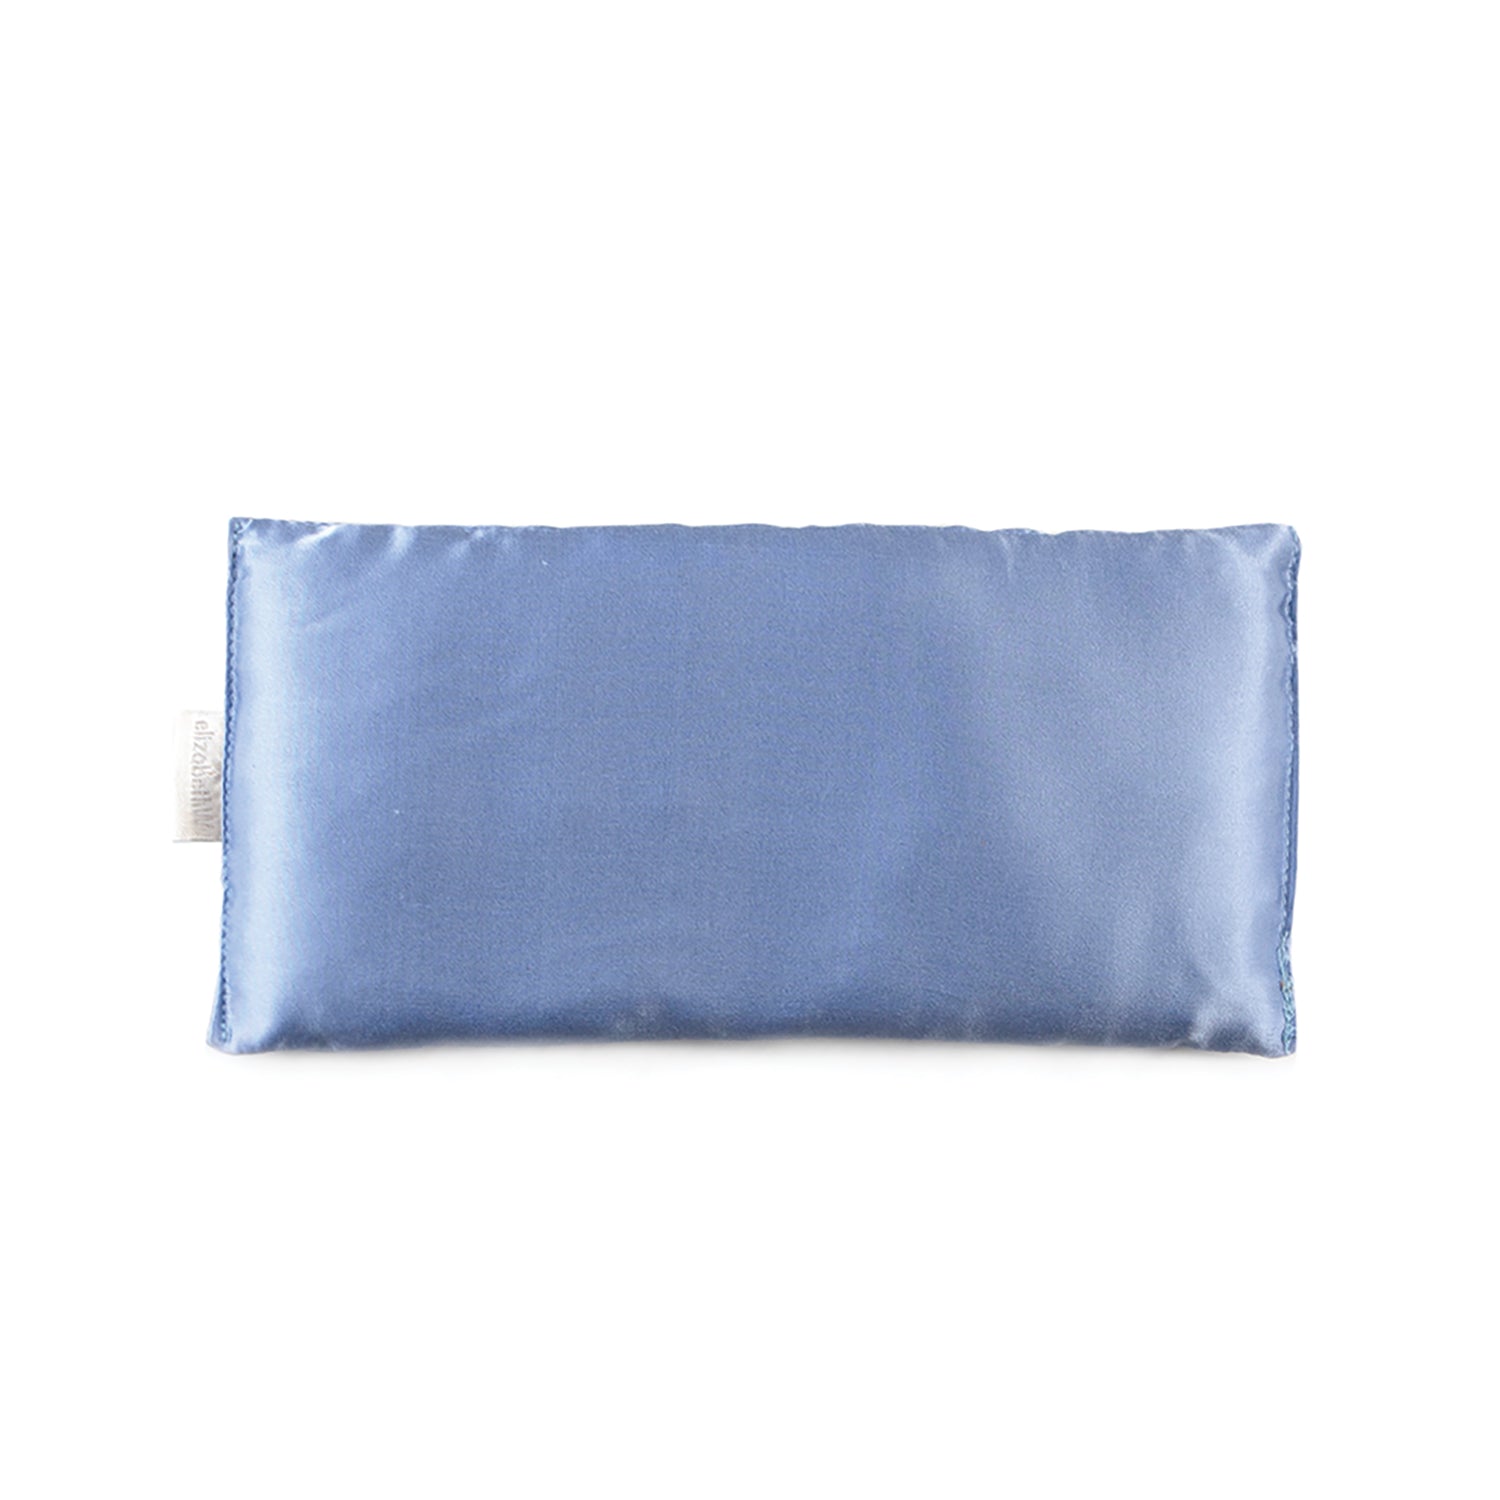 weighted eye pillow